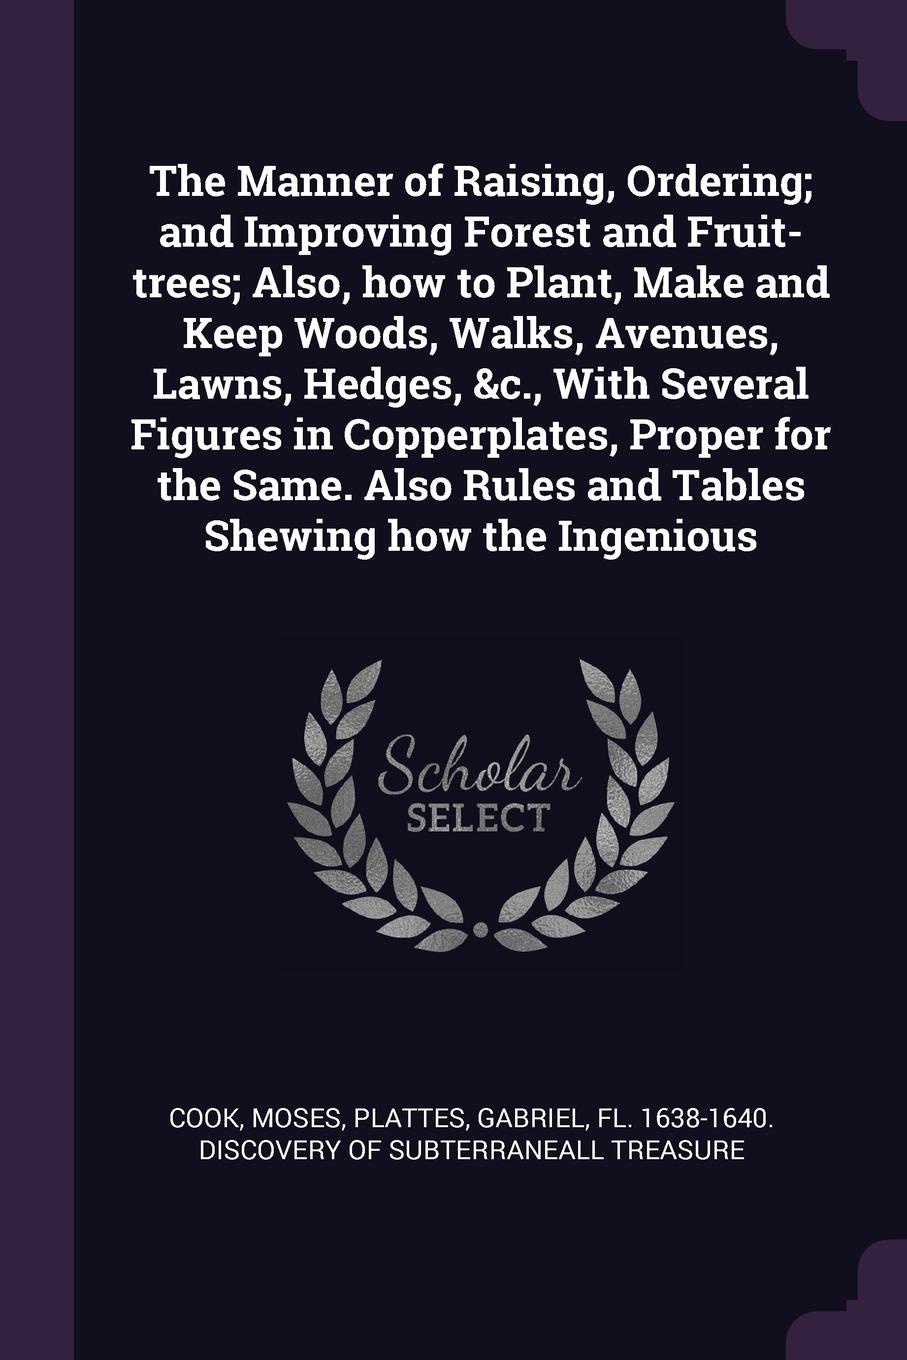 The Manner of Raising, Ordering; and Improving Forest and Fruit-trees; Also, how to Plant, Make and Keep Woods, Walks, Avenues, Lawns, Hedges, &c., With Several Figures in Copperplates, Proper for the Same. Also Rules and Tables Shewing how the In...